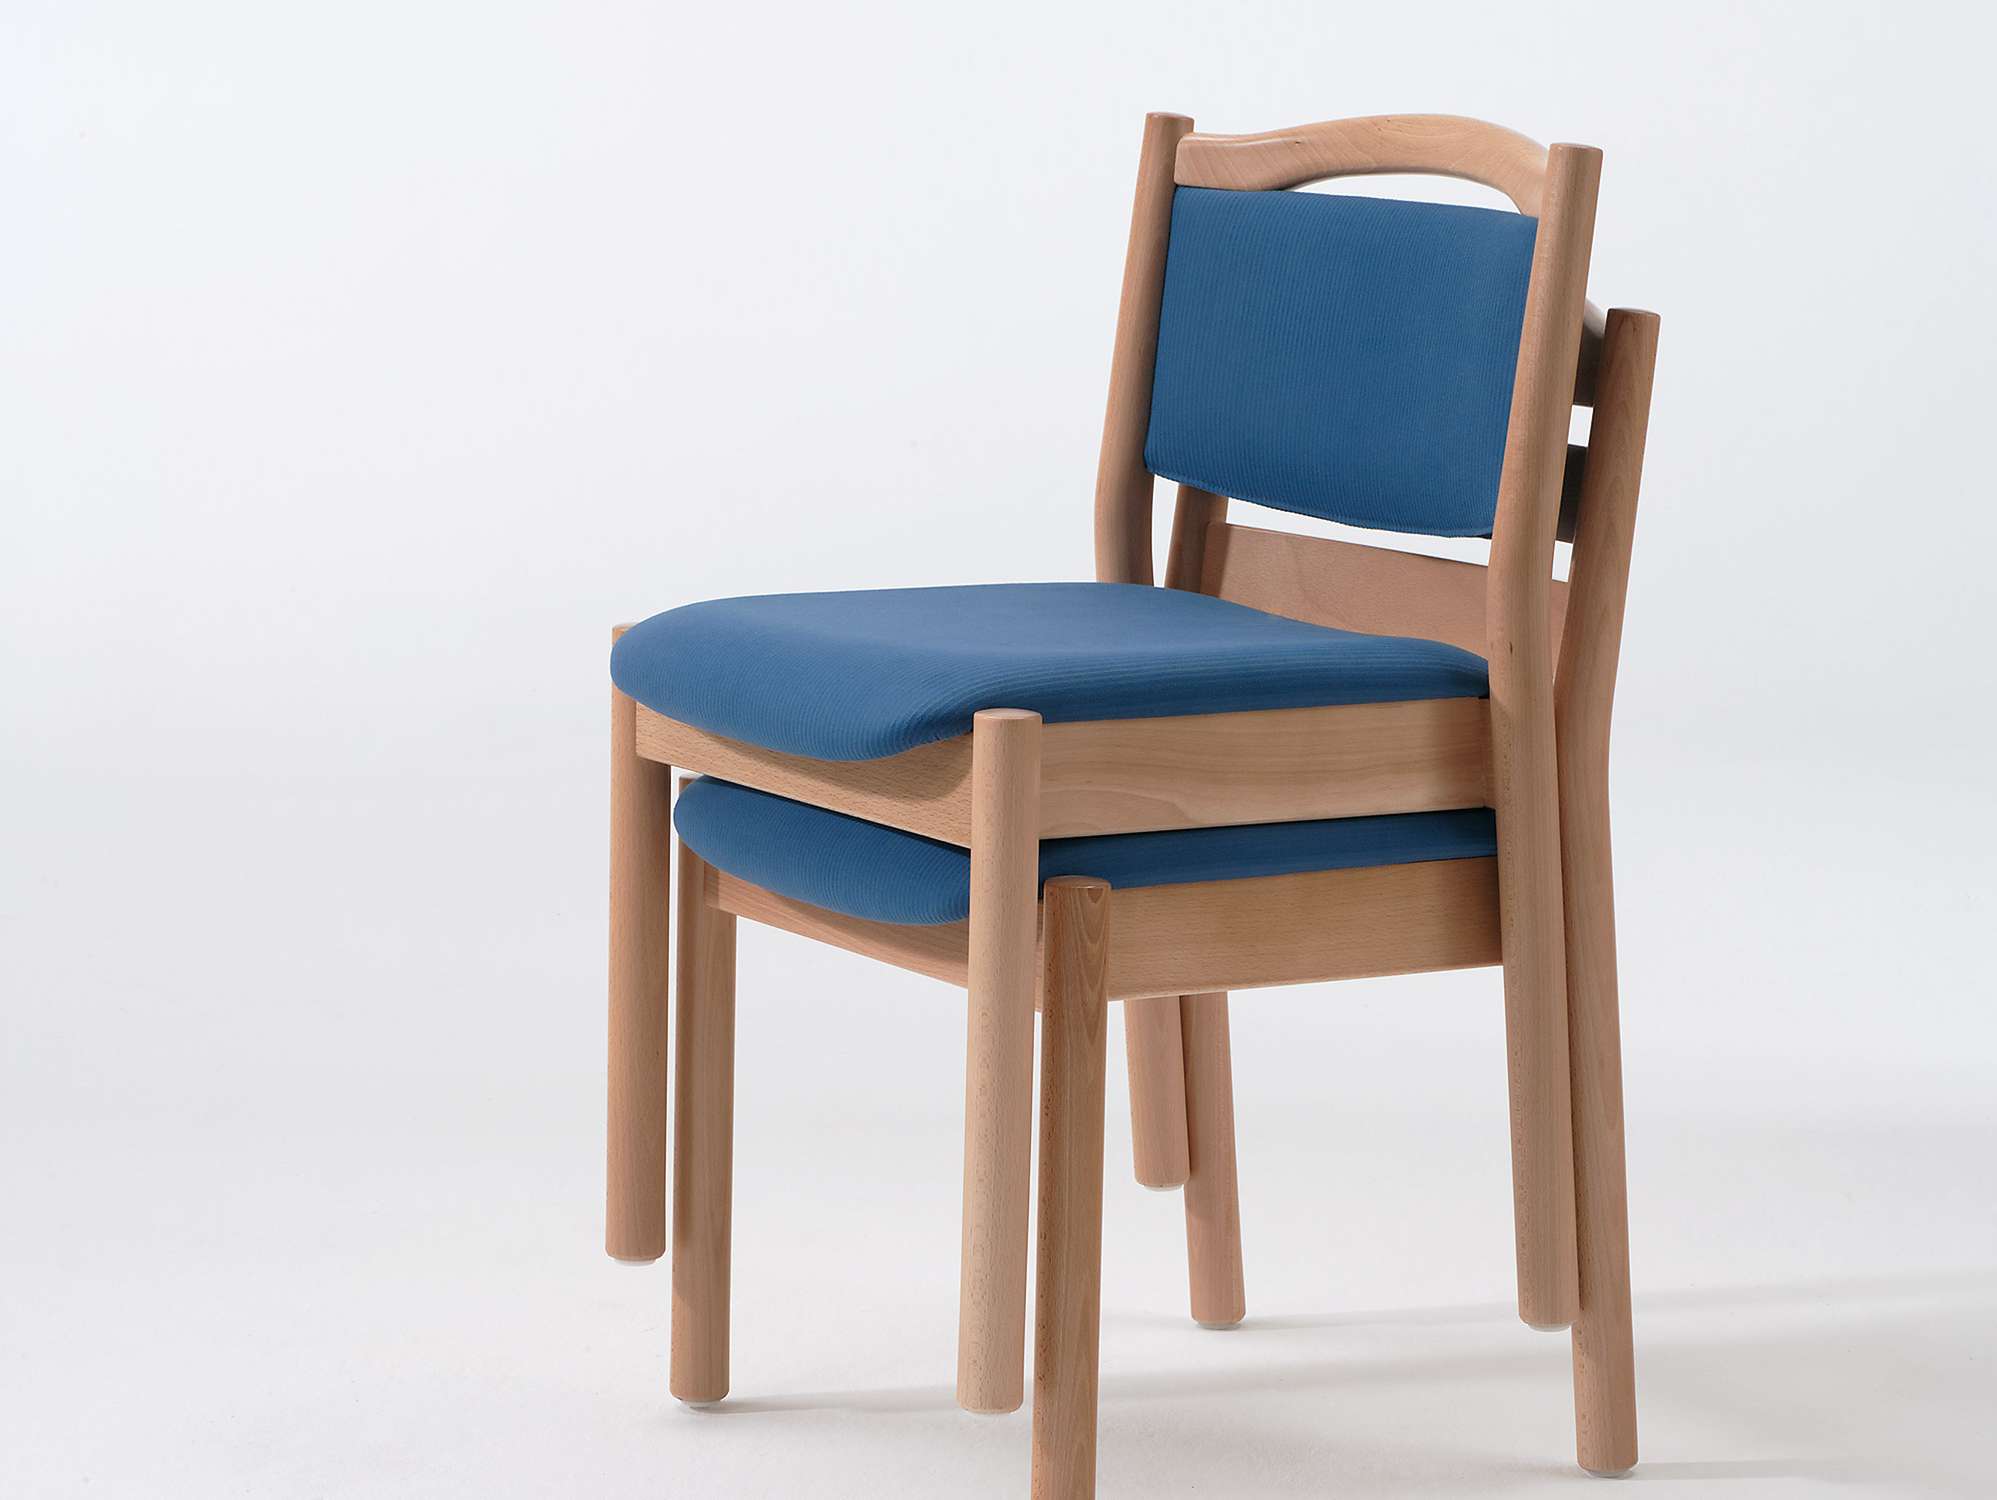 Stacking chairs from the Primo furnishing range